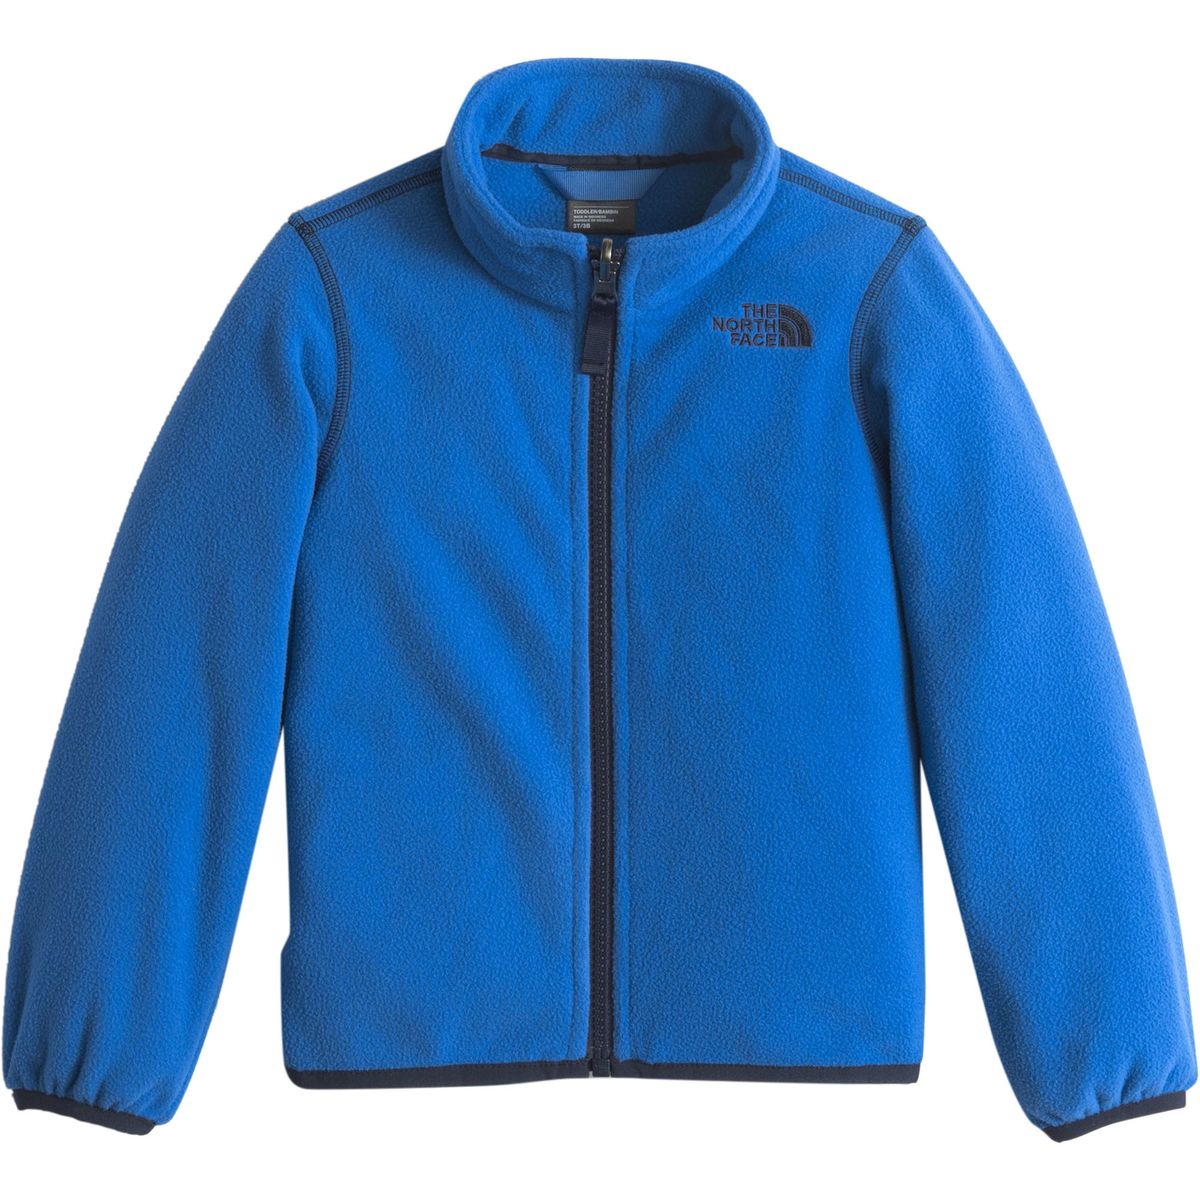 The North Face Vortex Triclimate Jacket - Toddler Boys' - Kids